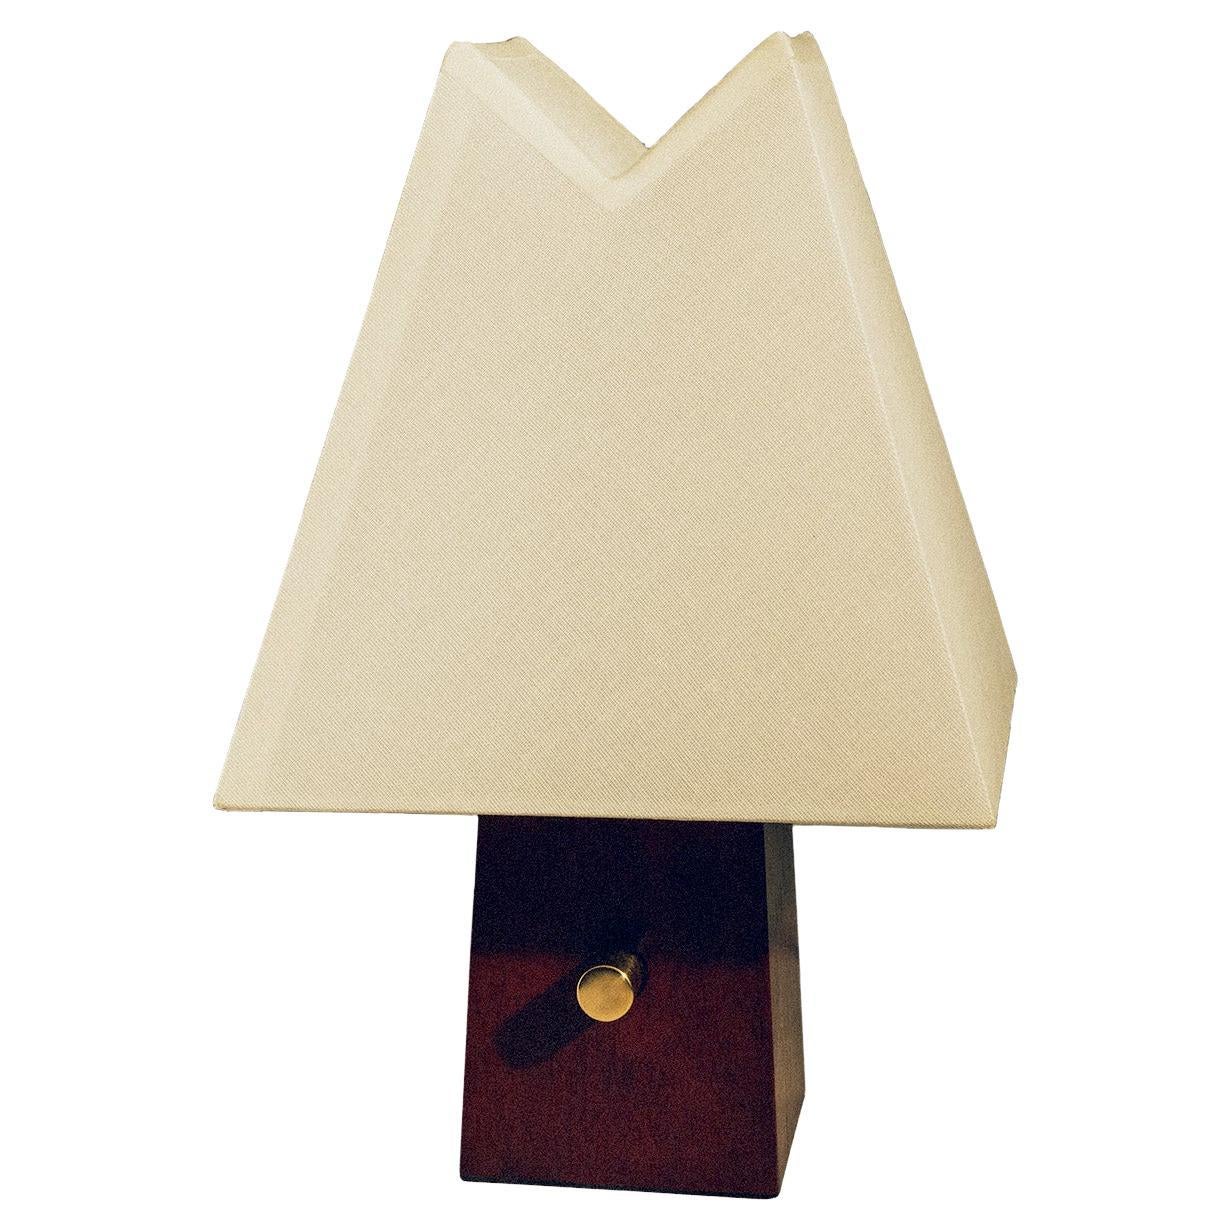 Contemporary Walnut Alpine Table Lamp by ASTRAEUS CLARKE Made in Brooklyn, NY For Sale